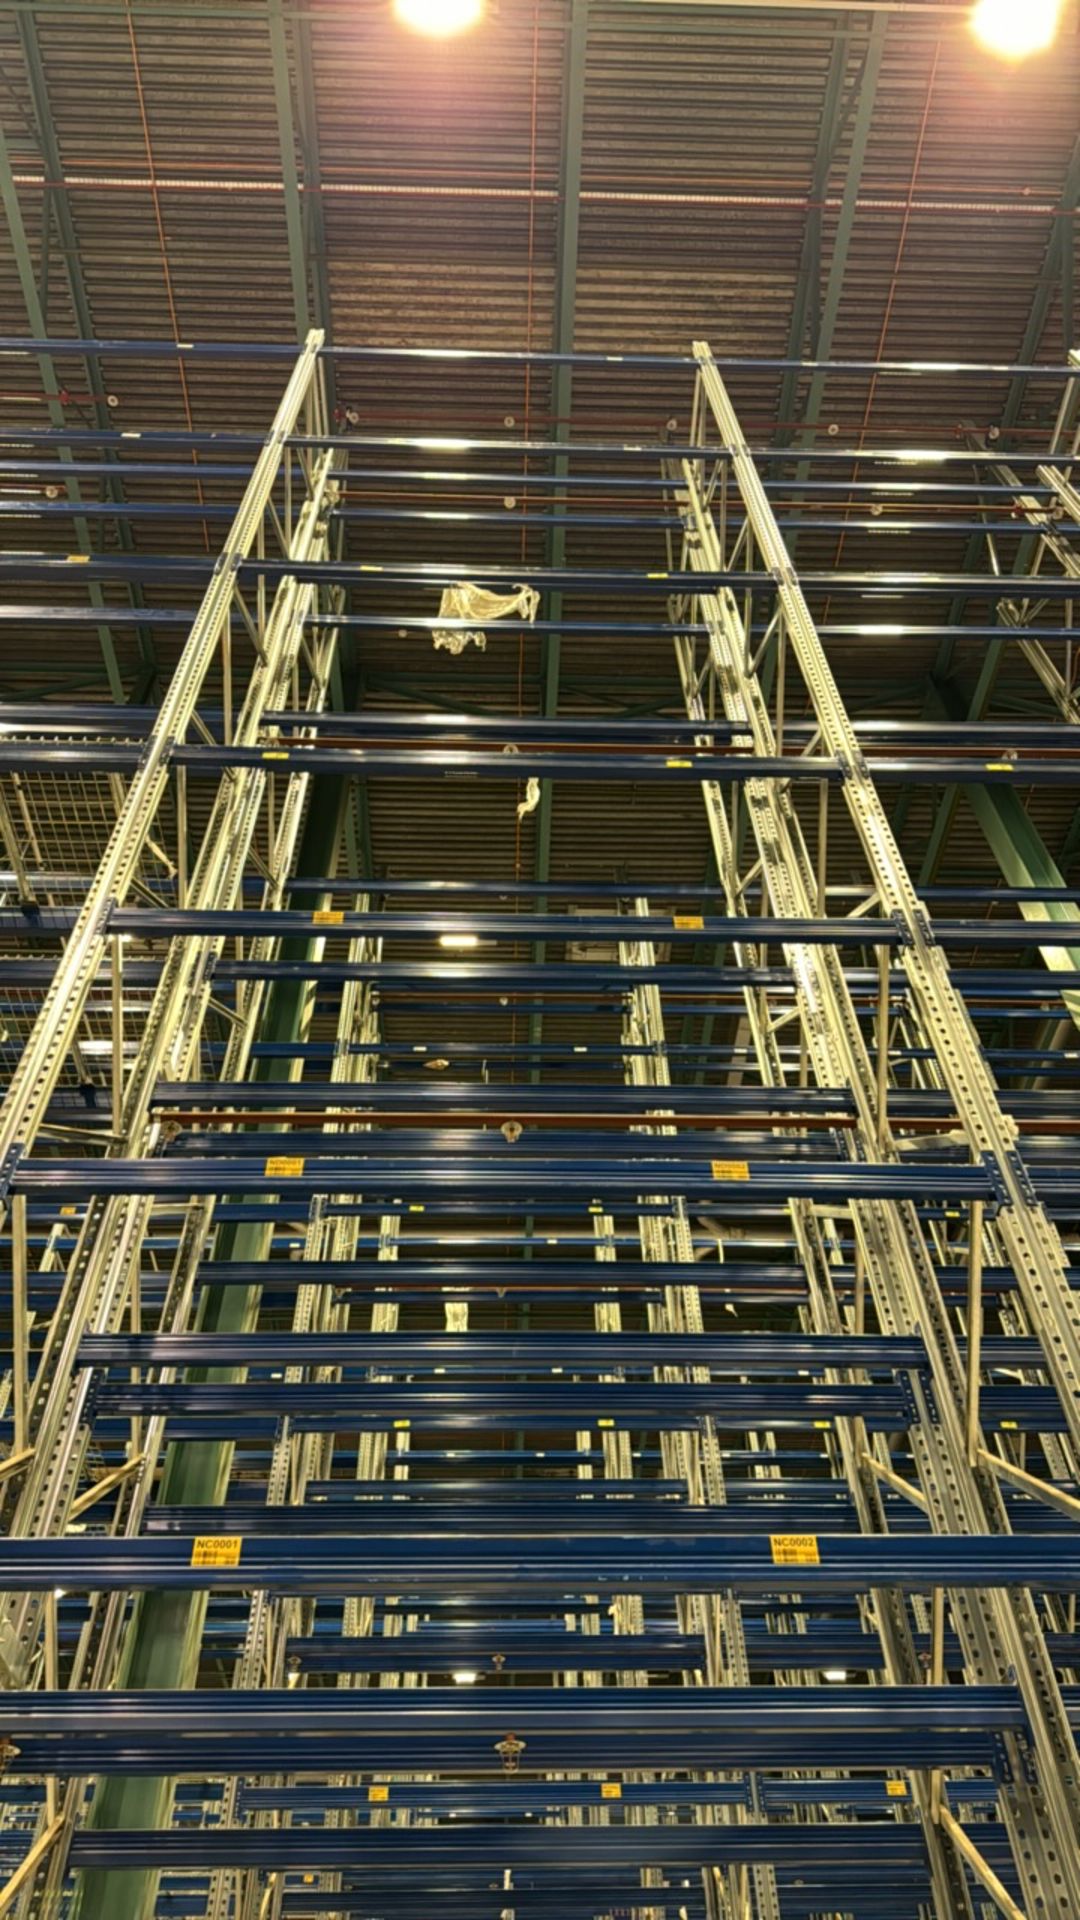 Run Of 22 Bays Of Back To Back Boltless Pallet Racking - Image 10 of 10